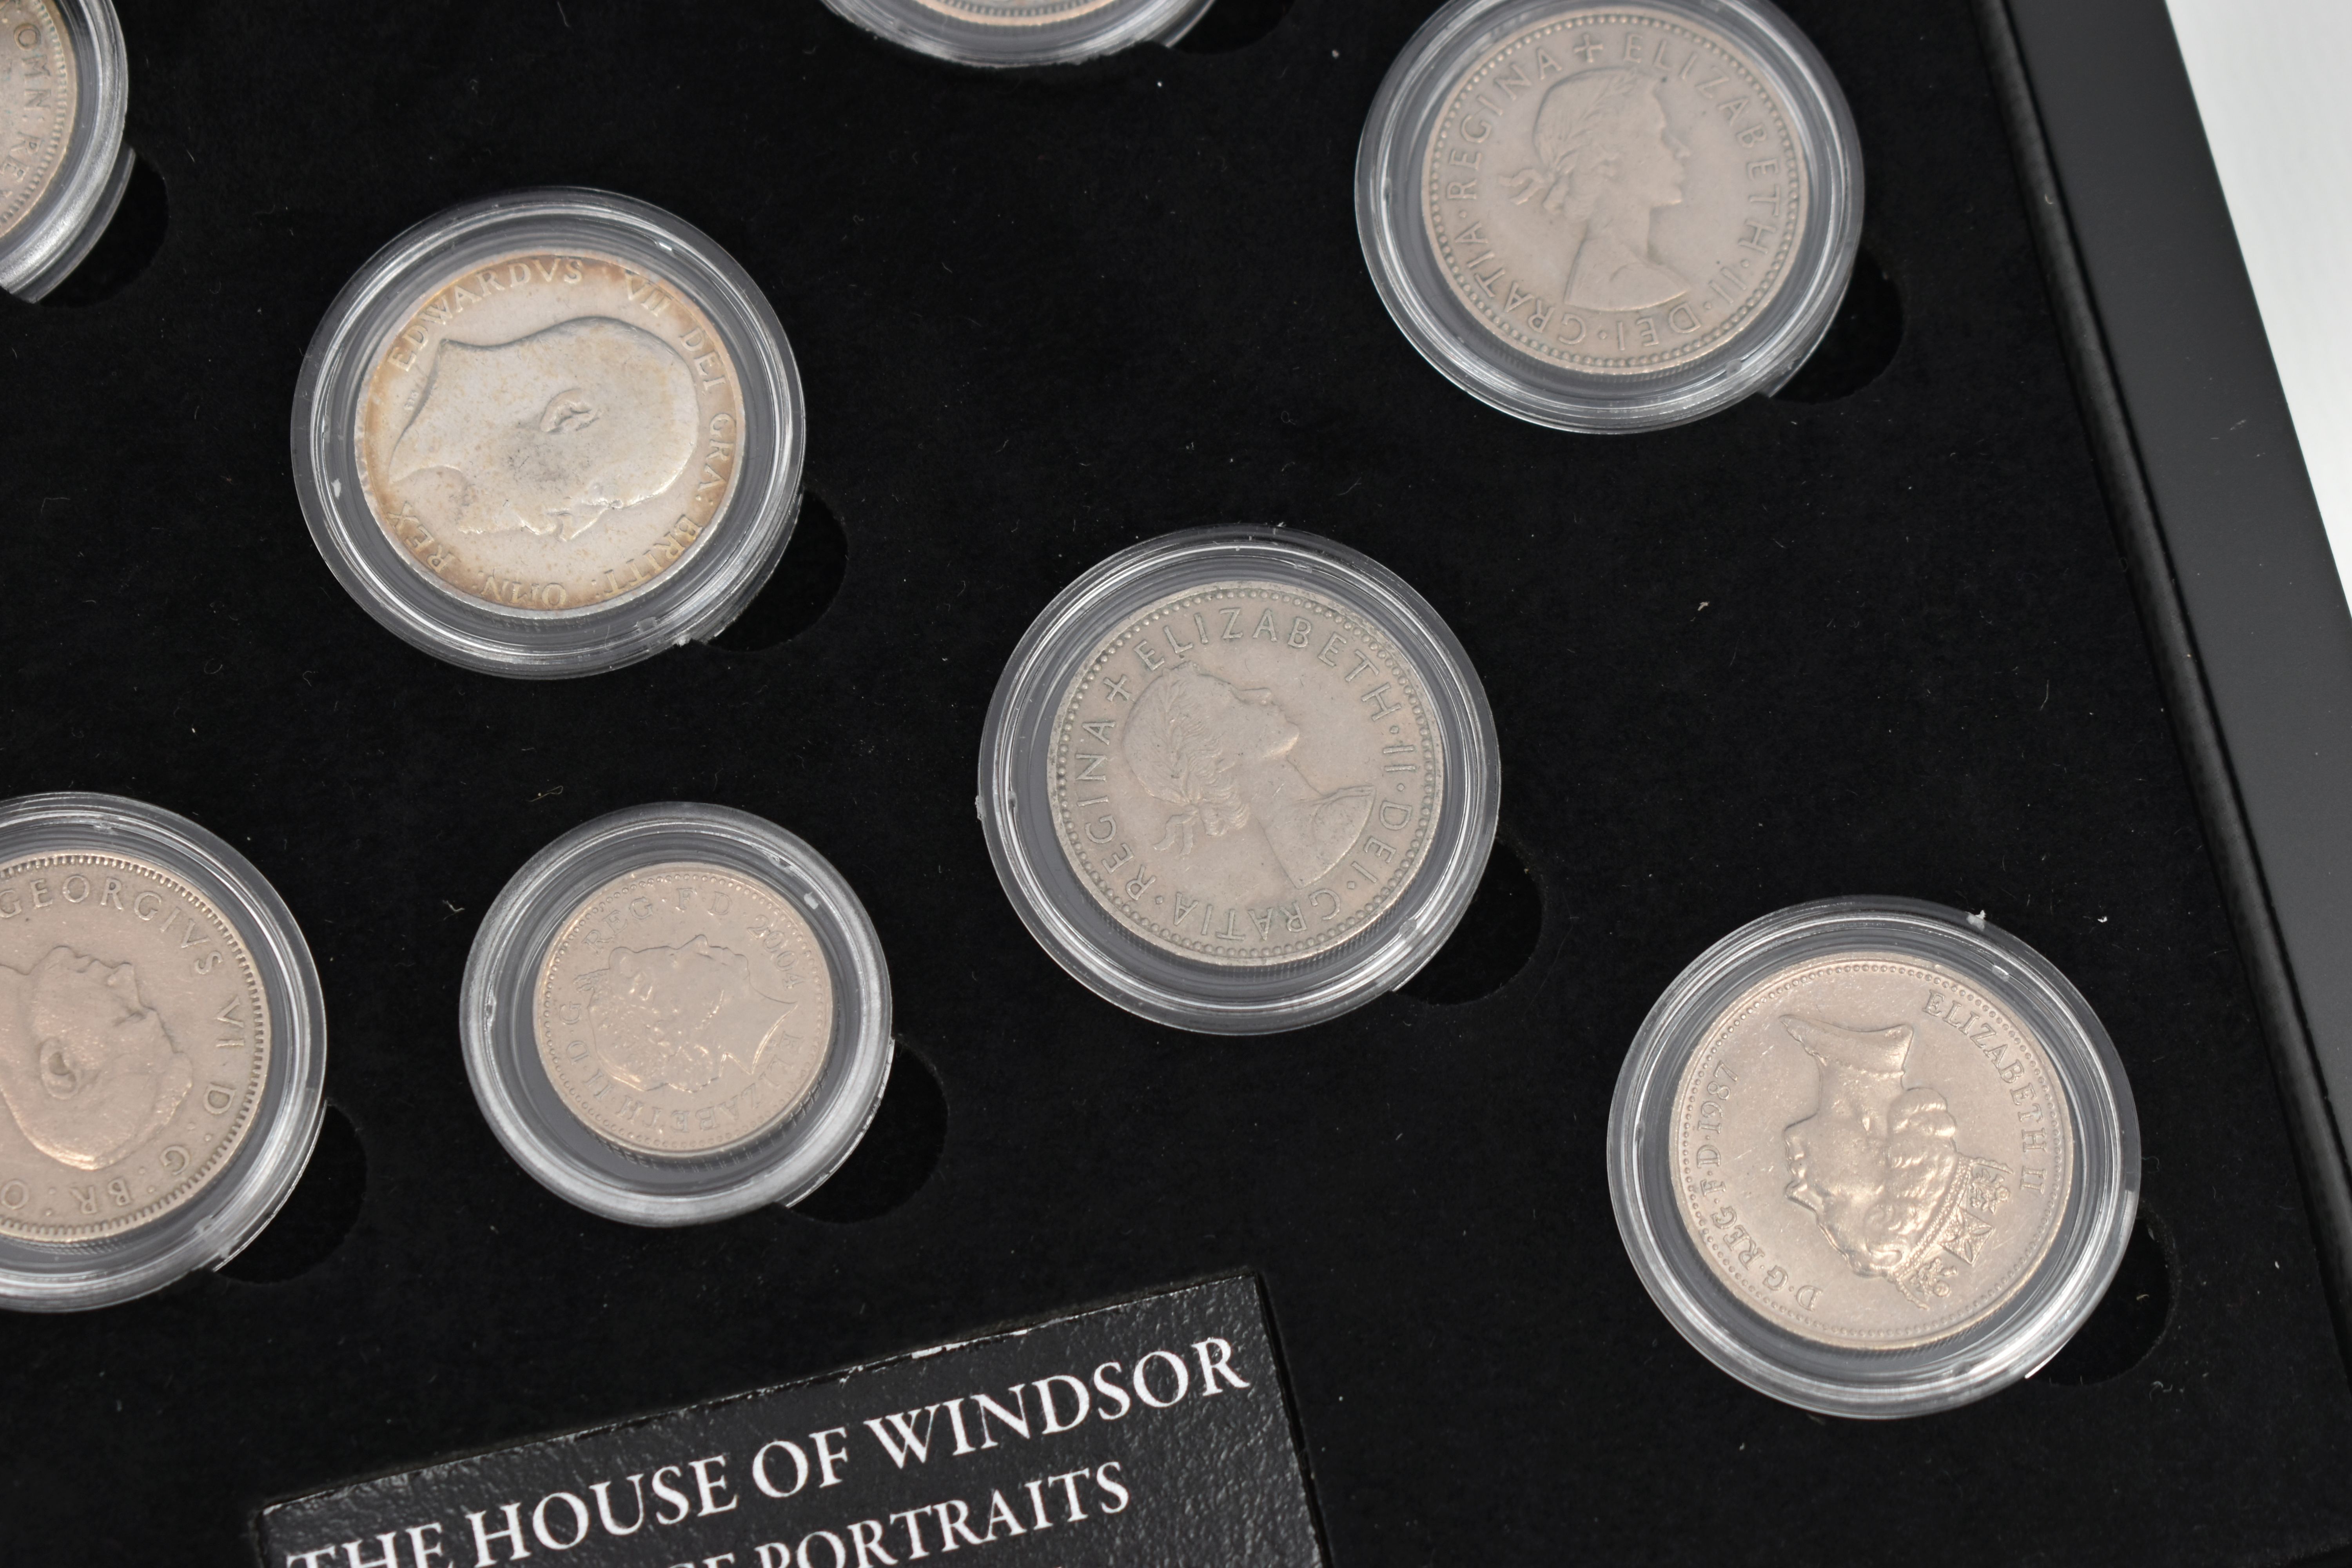 A CASED SET OF COMMEMORATIVE COINS, The House of Windsor coinage portraits shilling set by The - Image 6 of 6